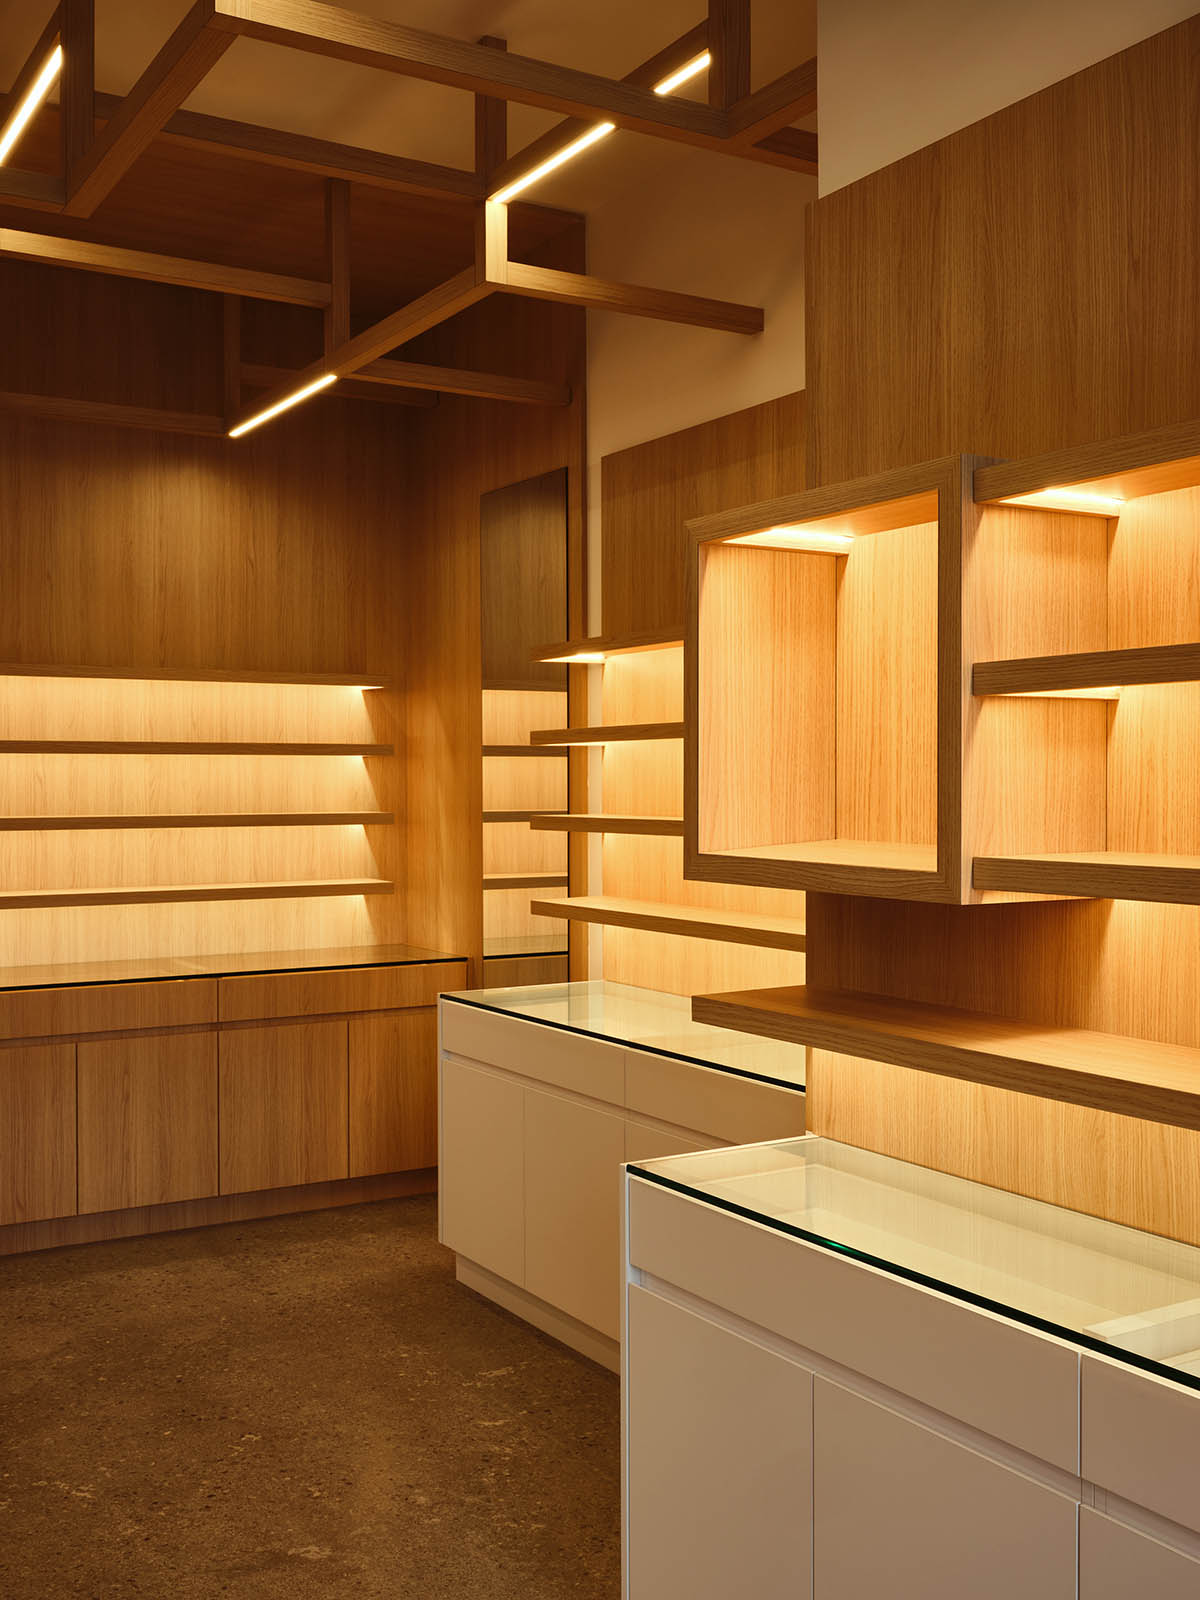 Innovation Eye Clinic by Atelier Sun features artistic ceiling made of wooden slats in Ontario